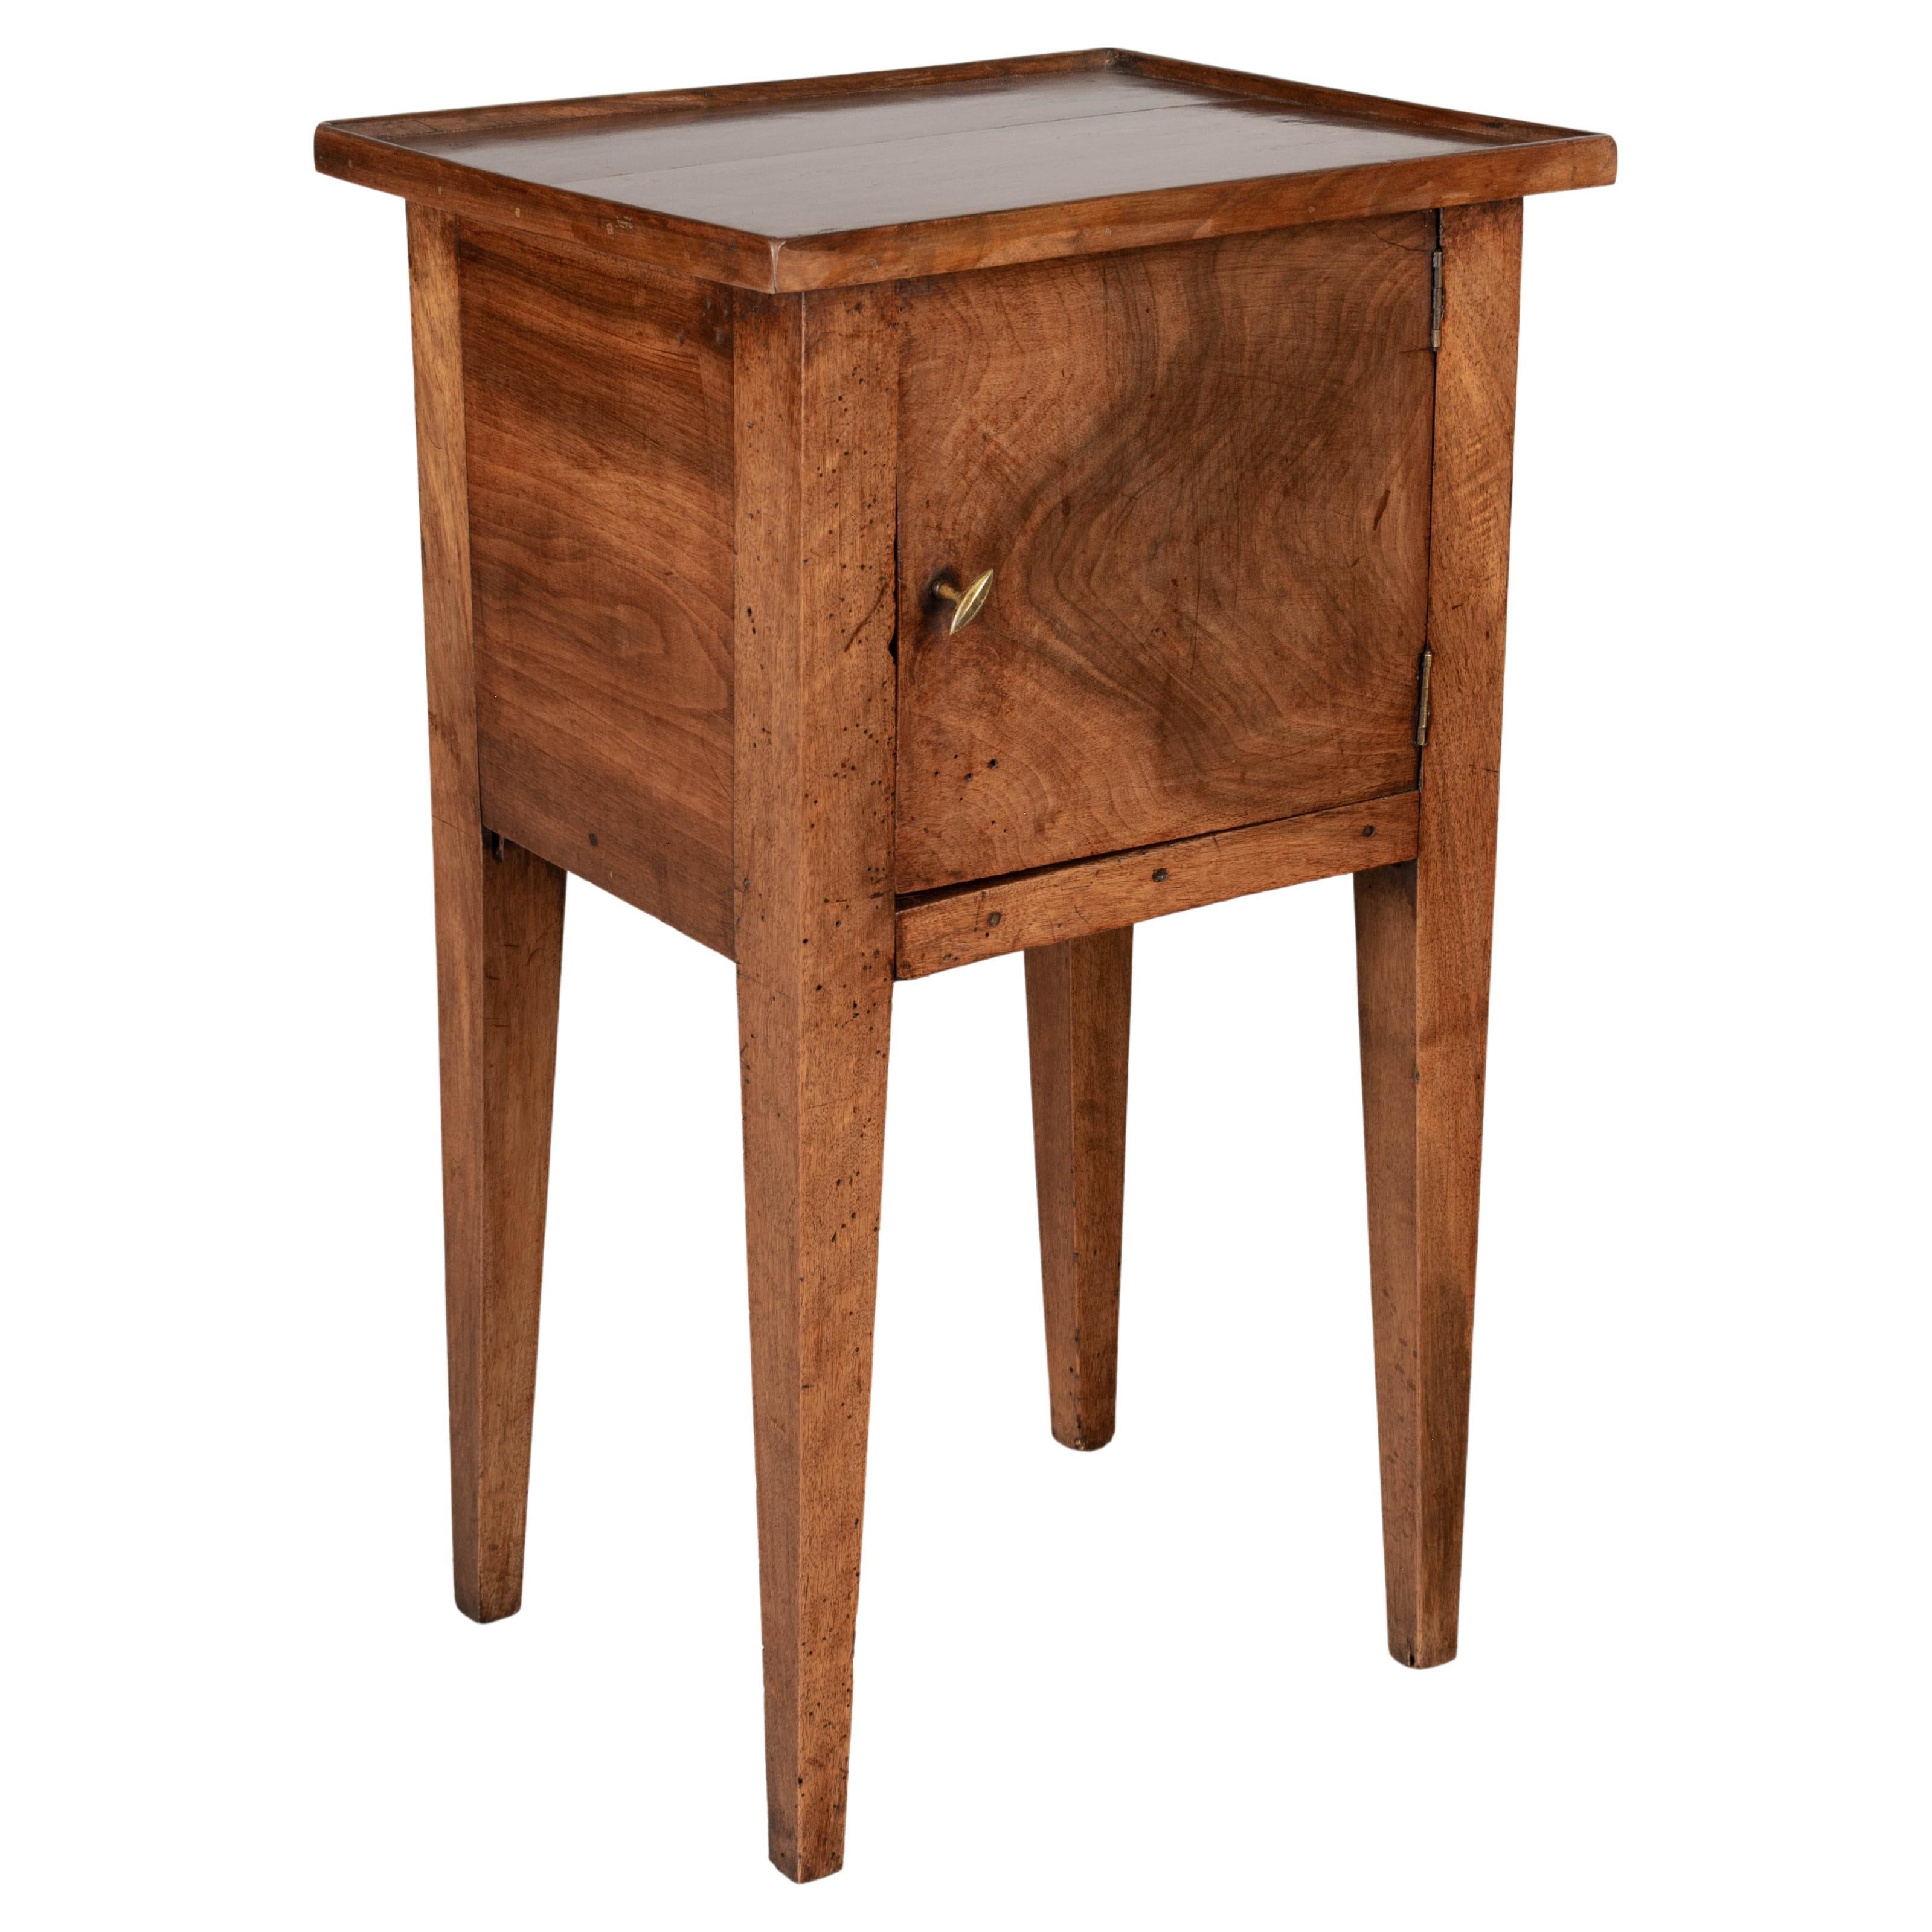 An early 20th century Louis XVI style Country French side table, hand-crafted of solid walnut and finished on all four sides. Cabinet door with brass pull. Tapered legs. Newer top with gallery. Pegged construction. Good proportions for use as a